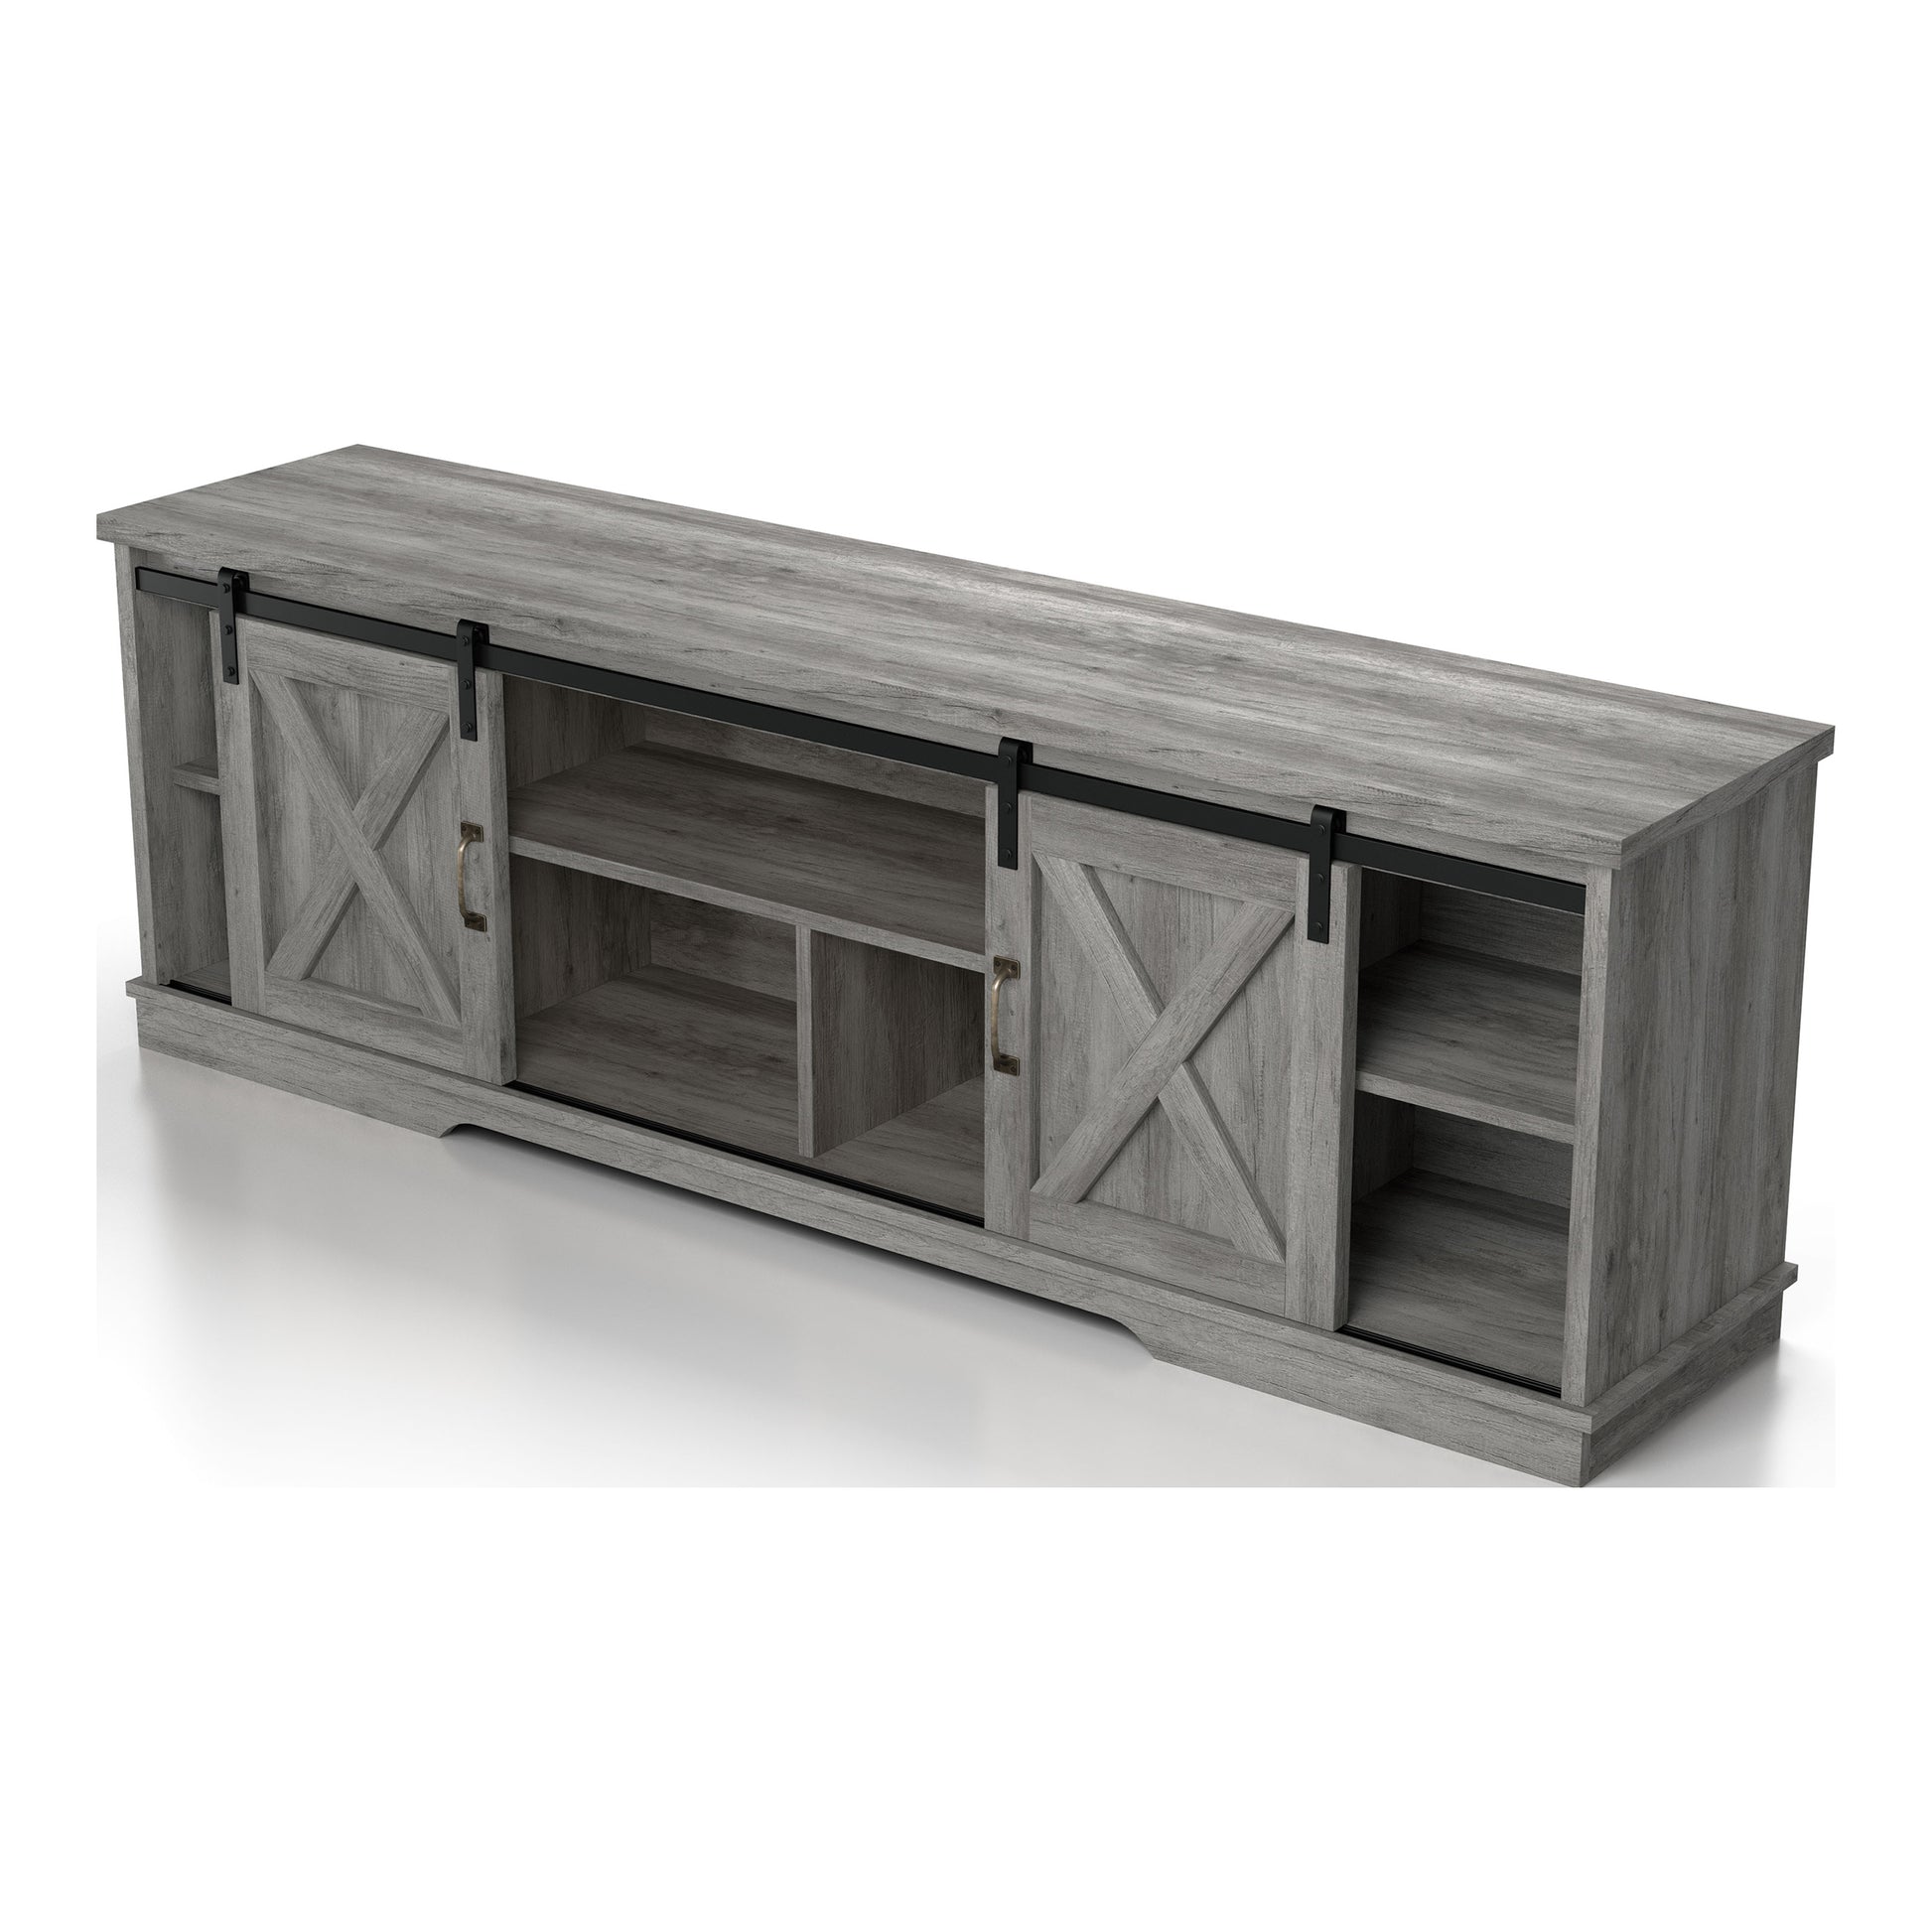 Left angled stand with sliding doors only from a two-piece rustic vintage gray oak TV stand and pier entertainment set on a white background